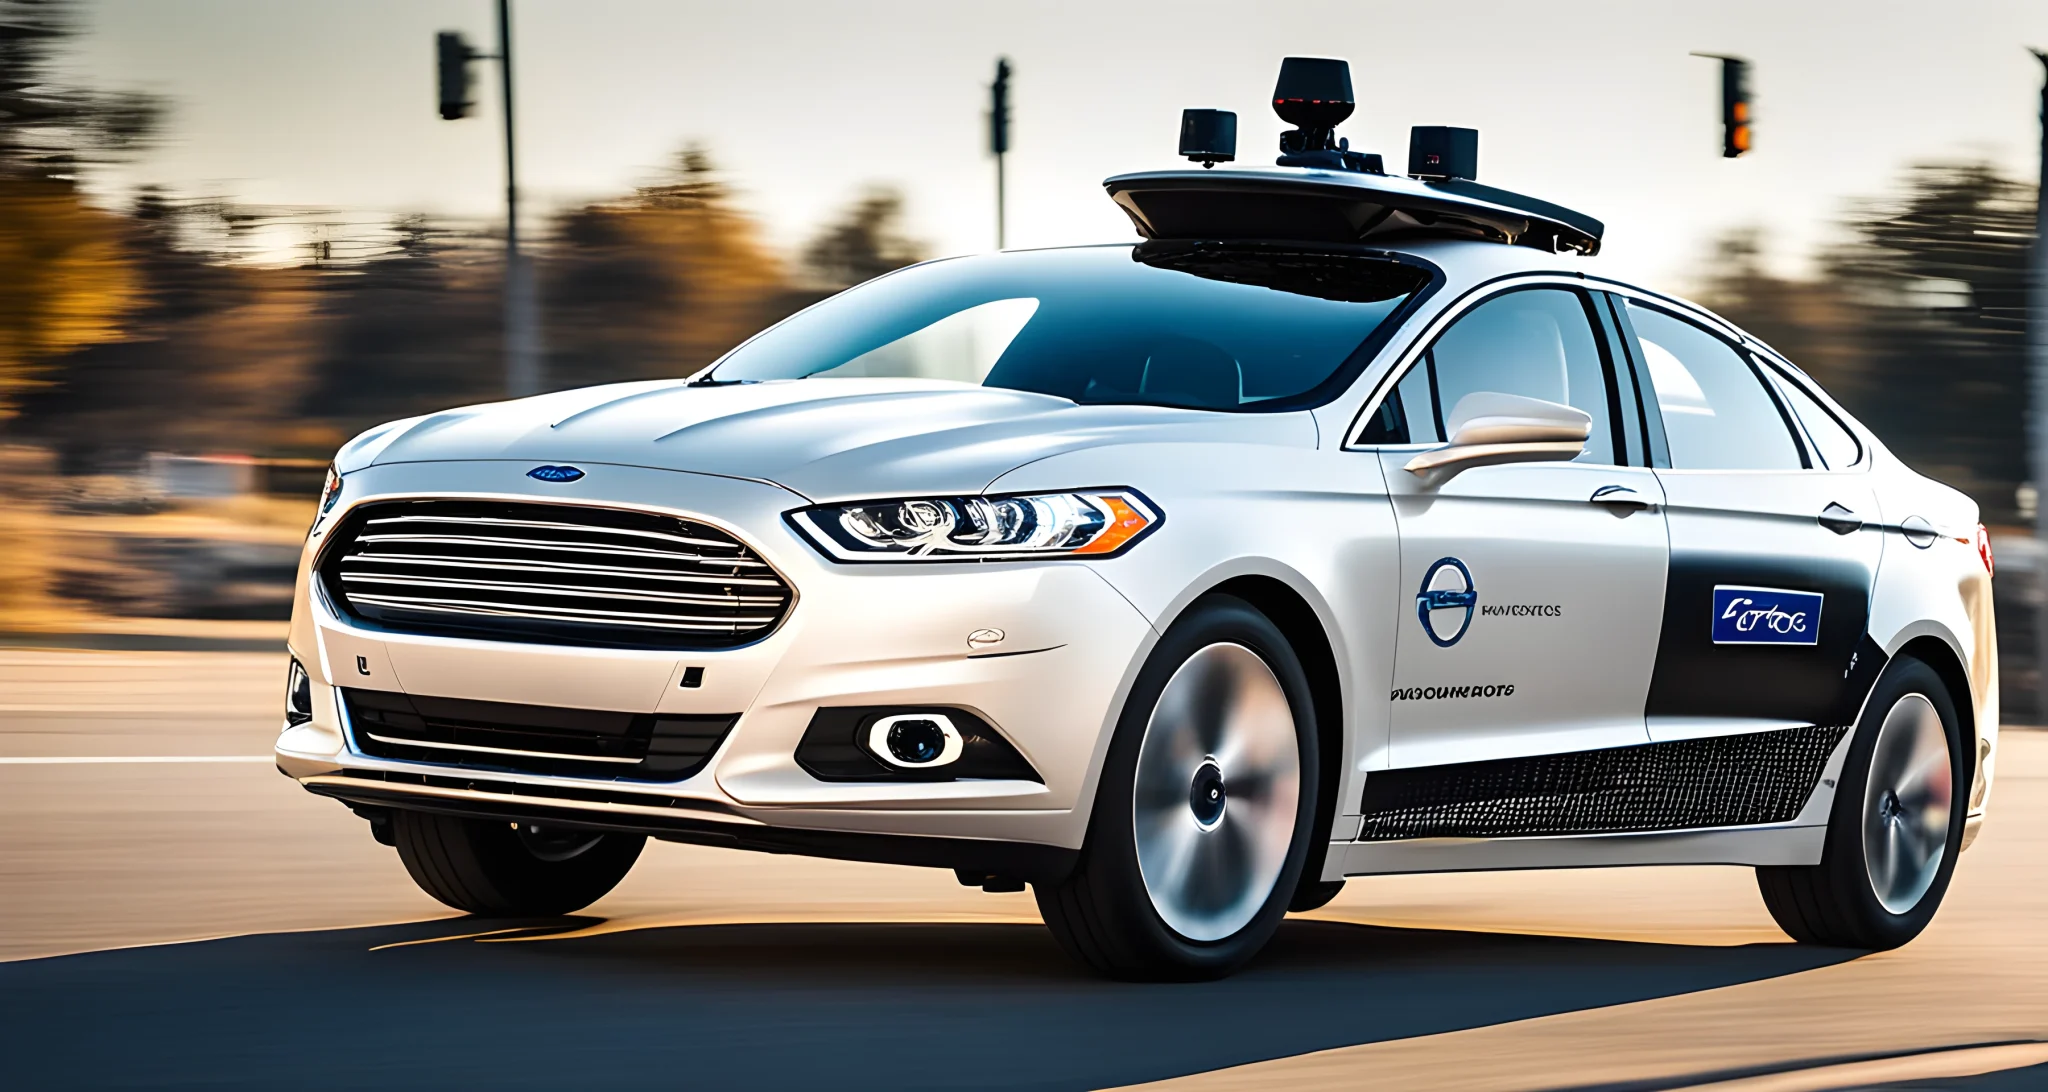 The image features the latest model of Ford's self-driving car prototype, equipped with advanced sensors and cameras for autonomous navigation.